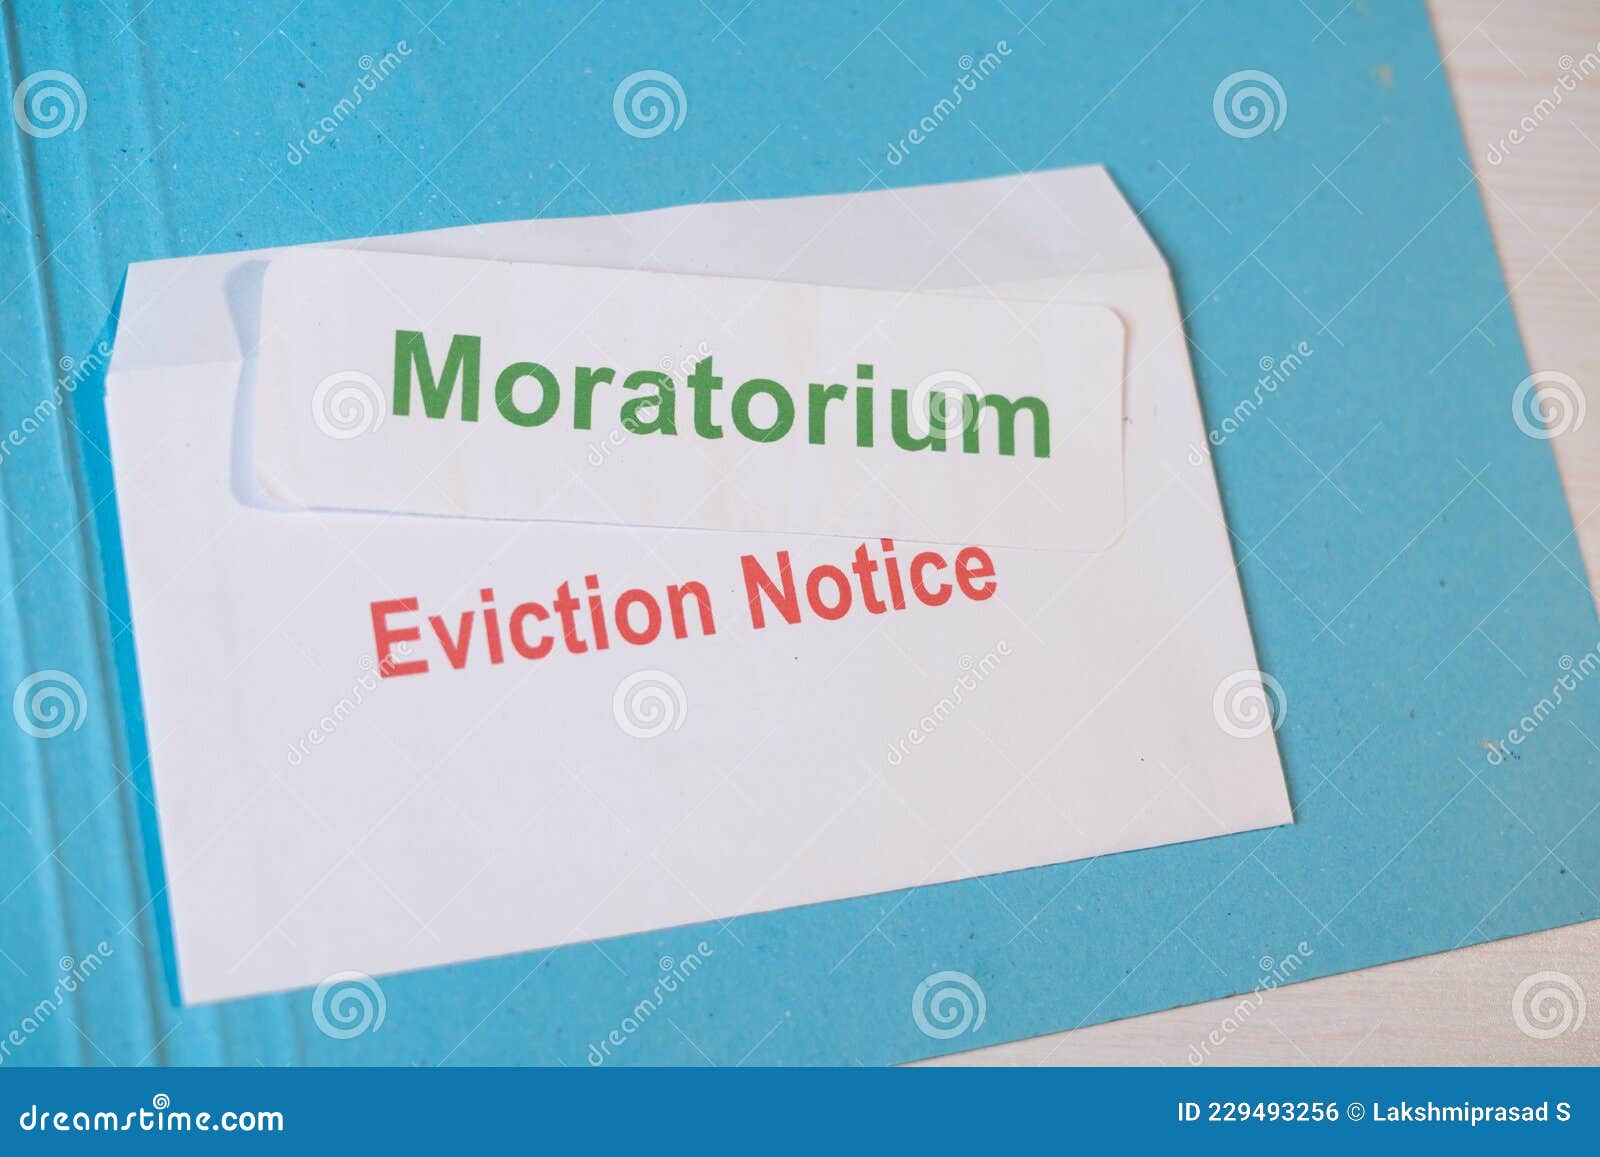 concept showing moratorium for evictions by showing eviction notice on table during coronavirus or covid-19 pandemic